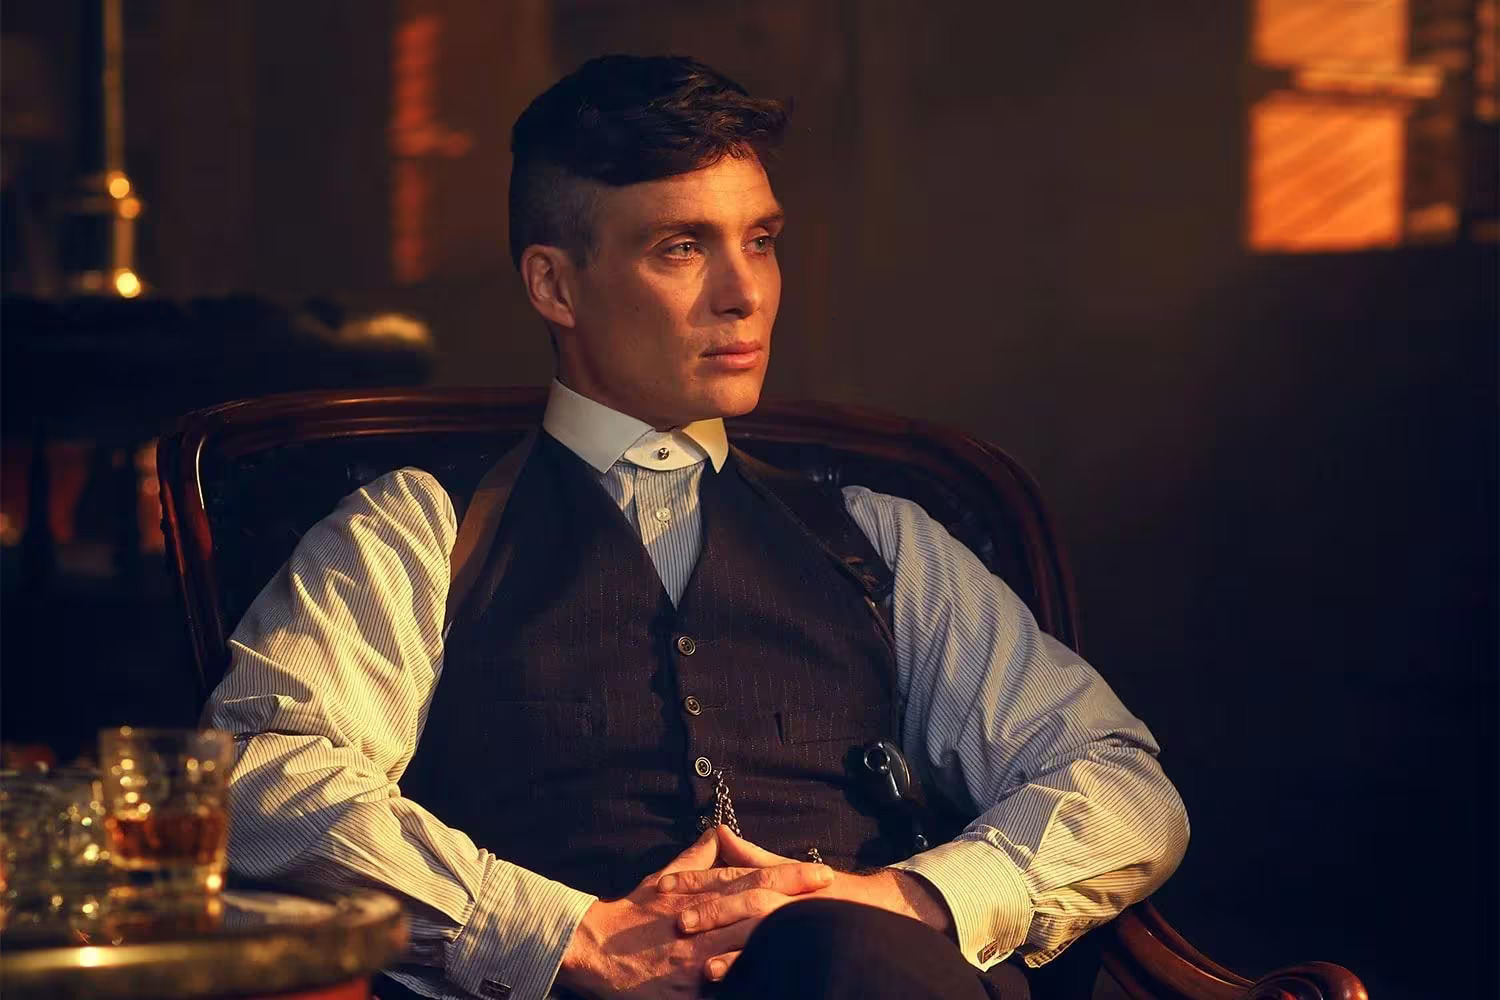 Cillian Murphy To Reprise Iconic Role In ‘Peaky Blinders’ Movie